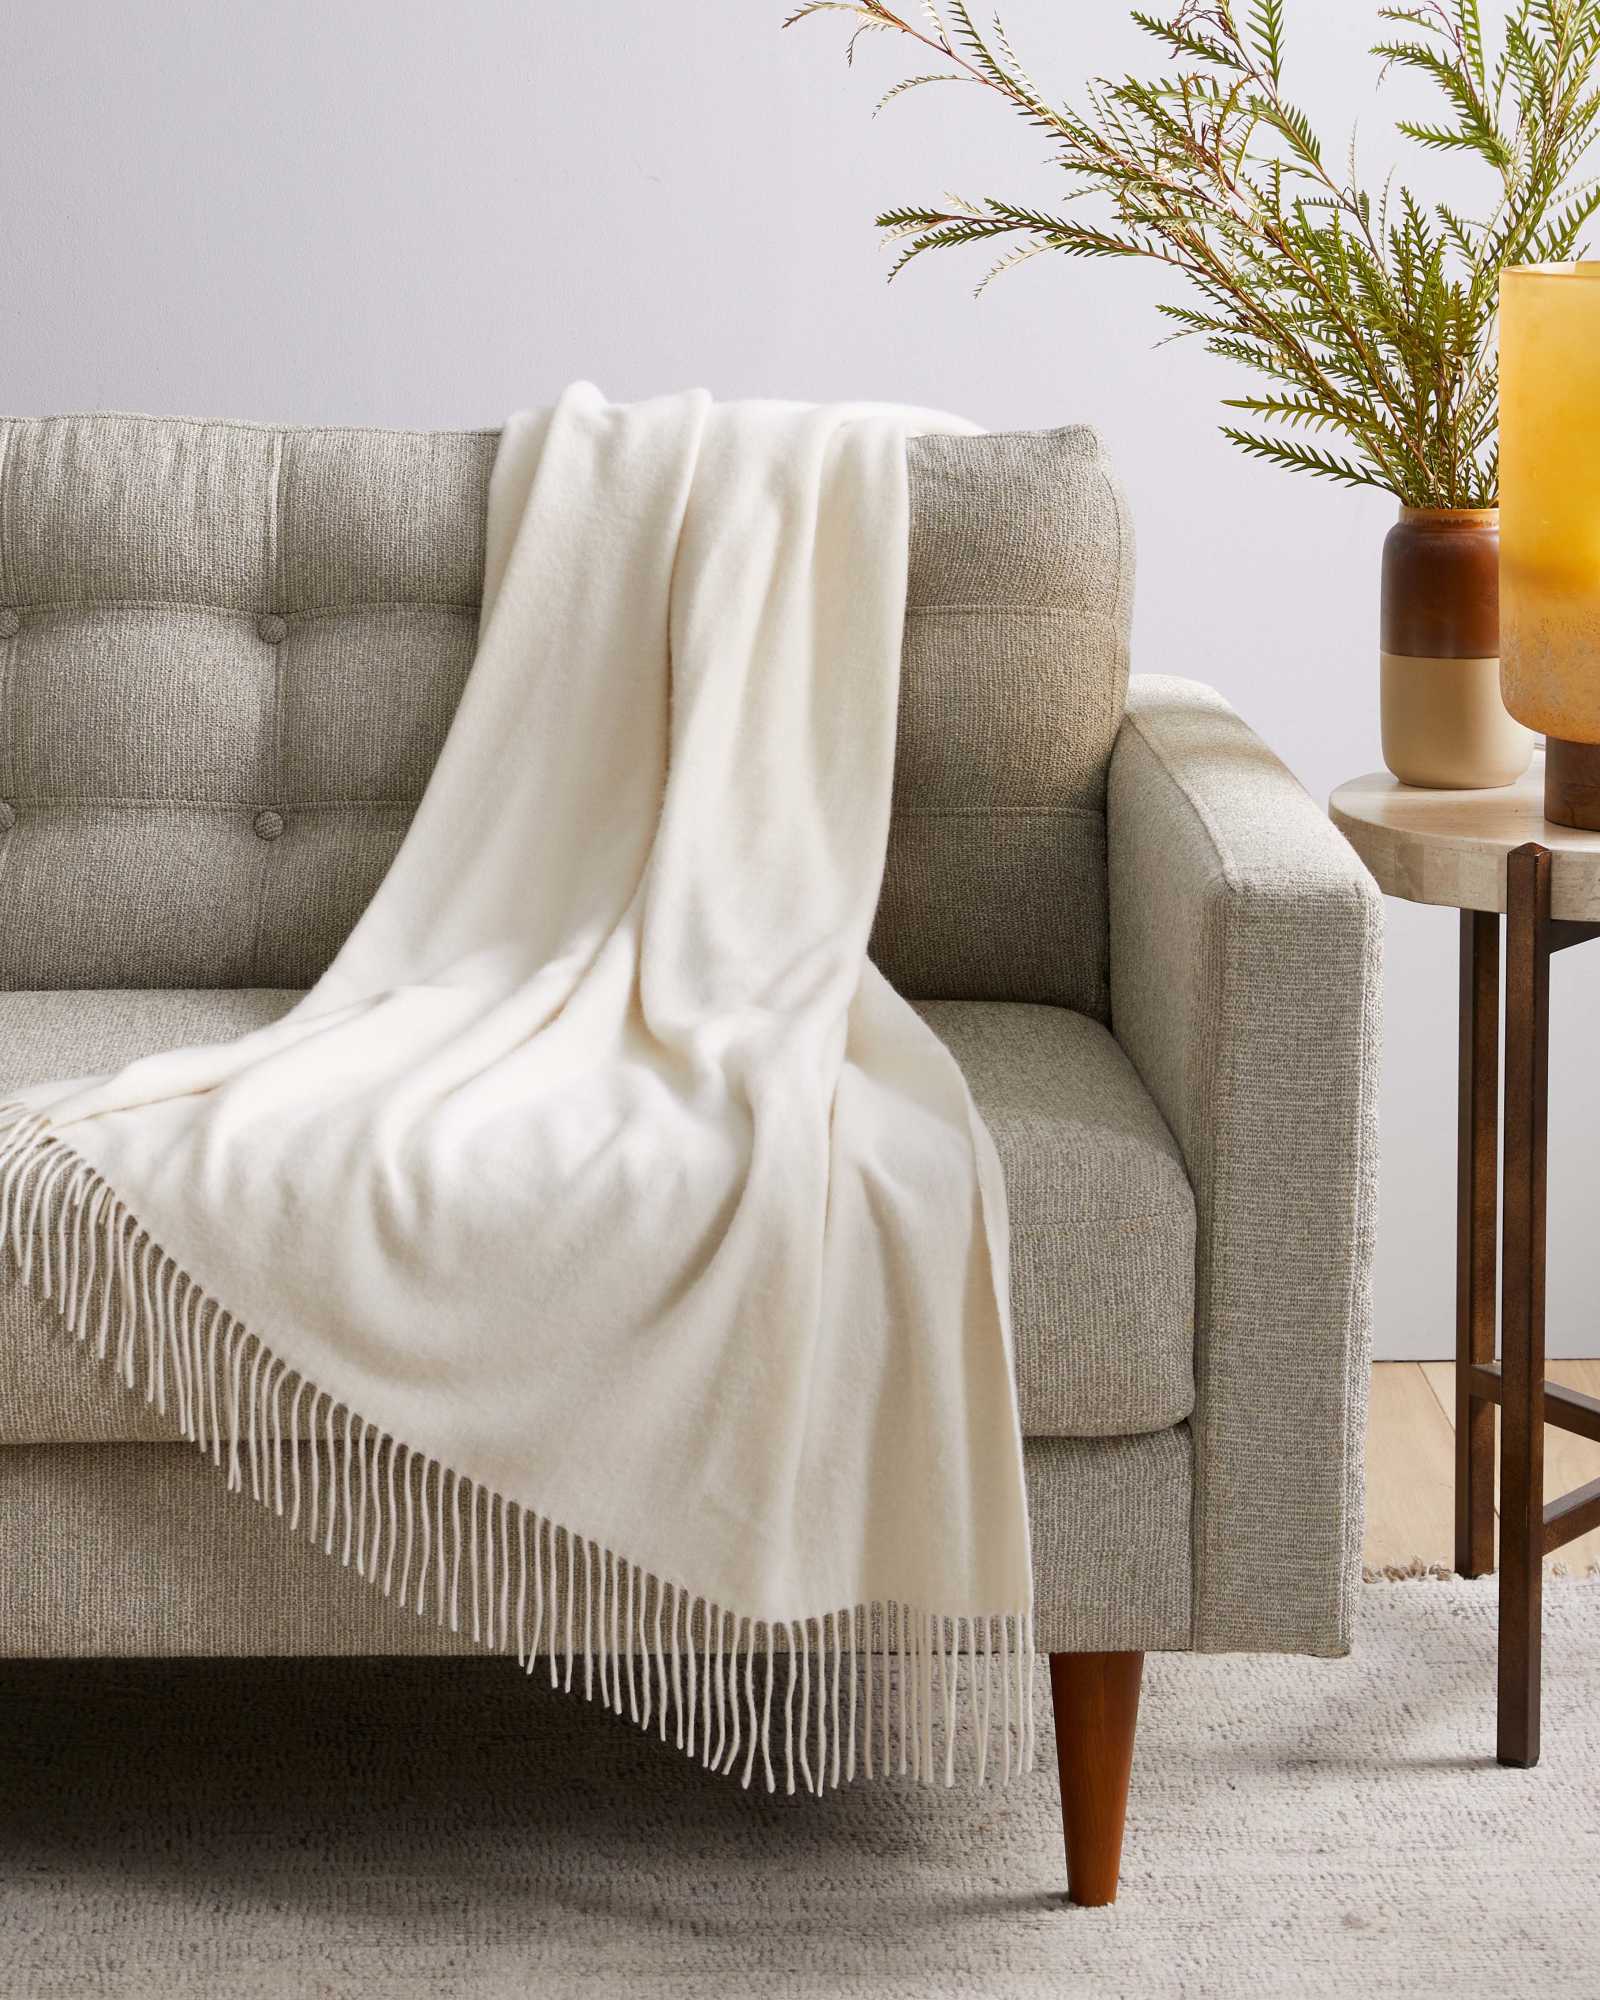 Cashmere throw blanket in ivory on chair